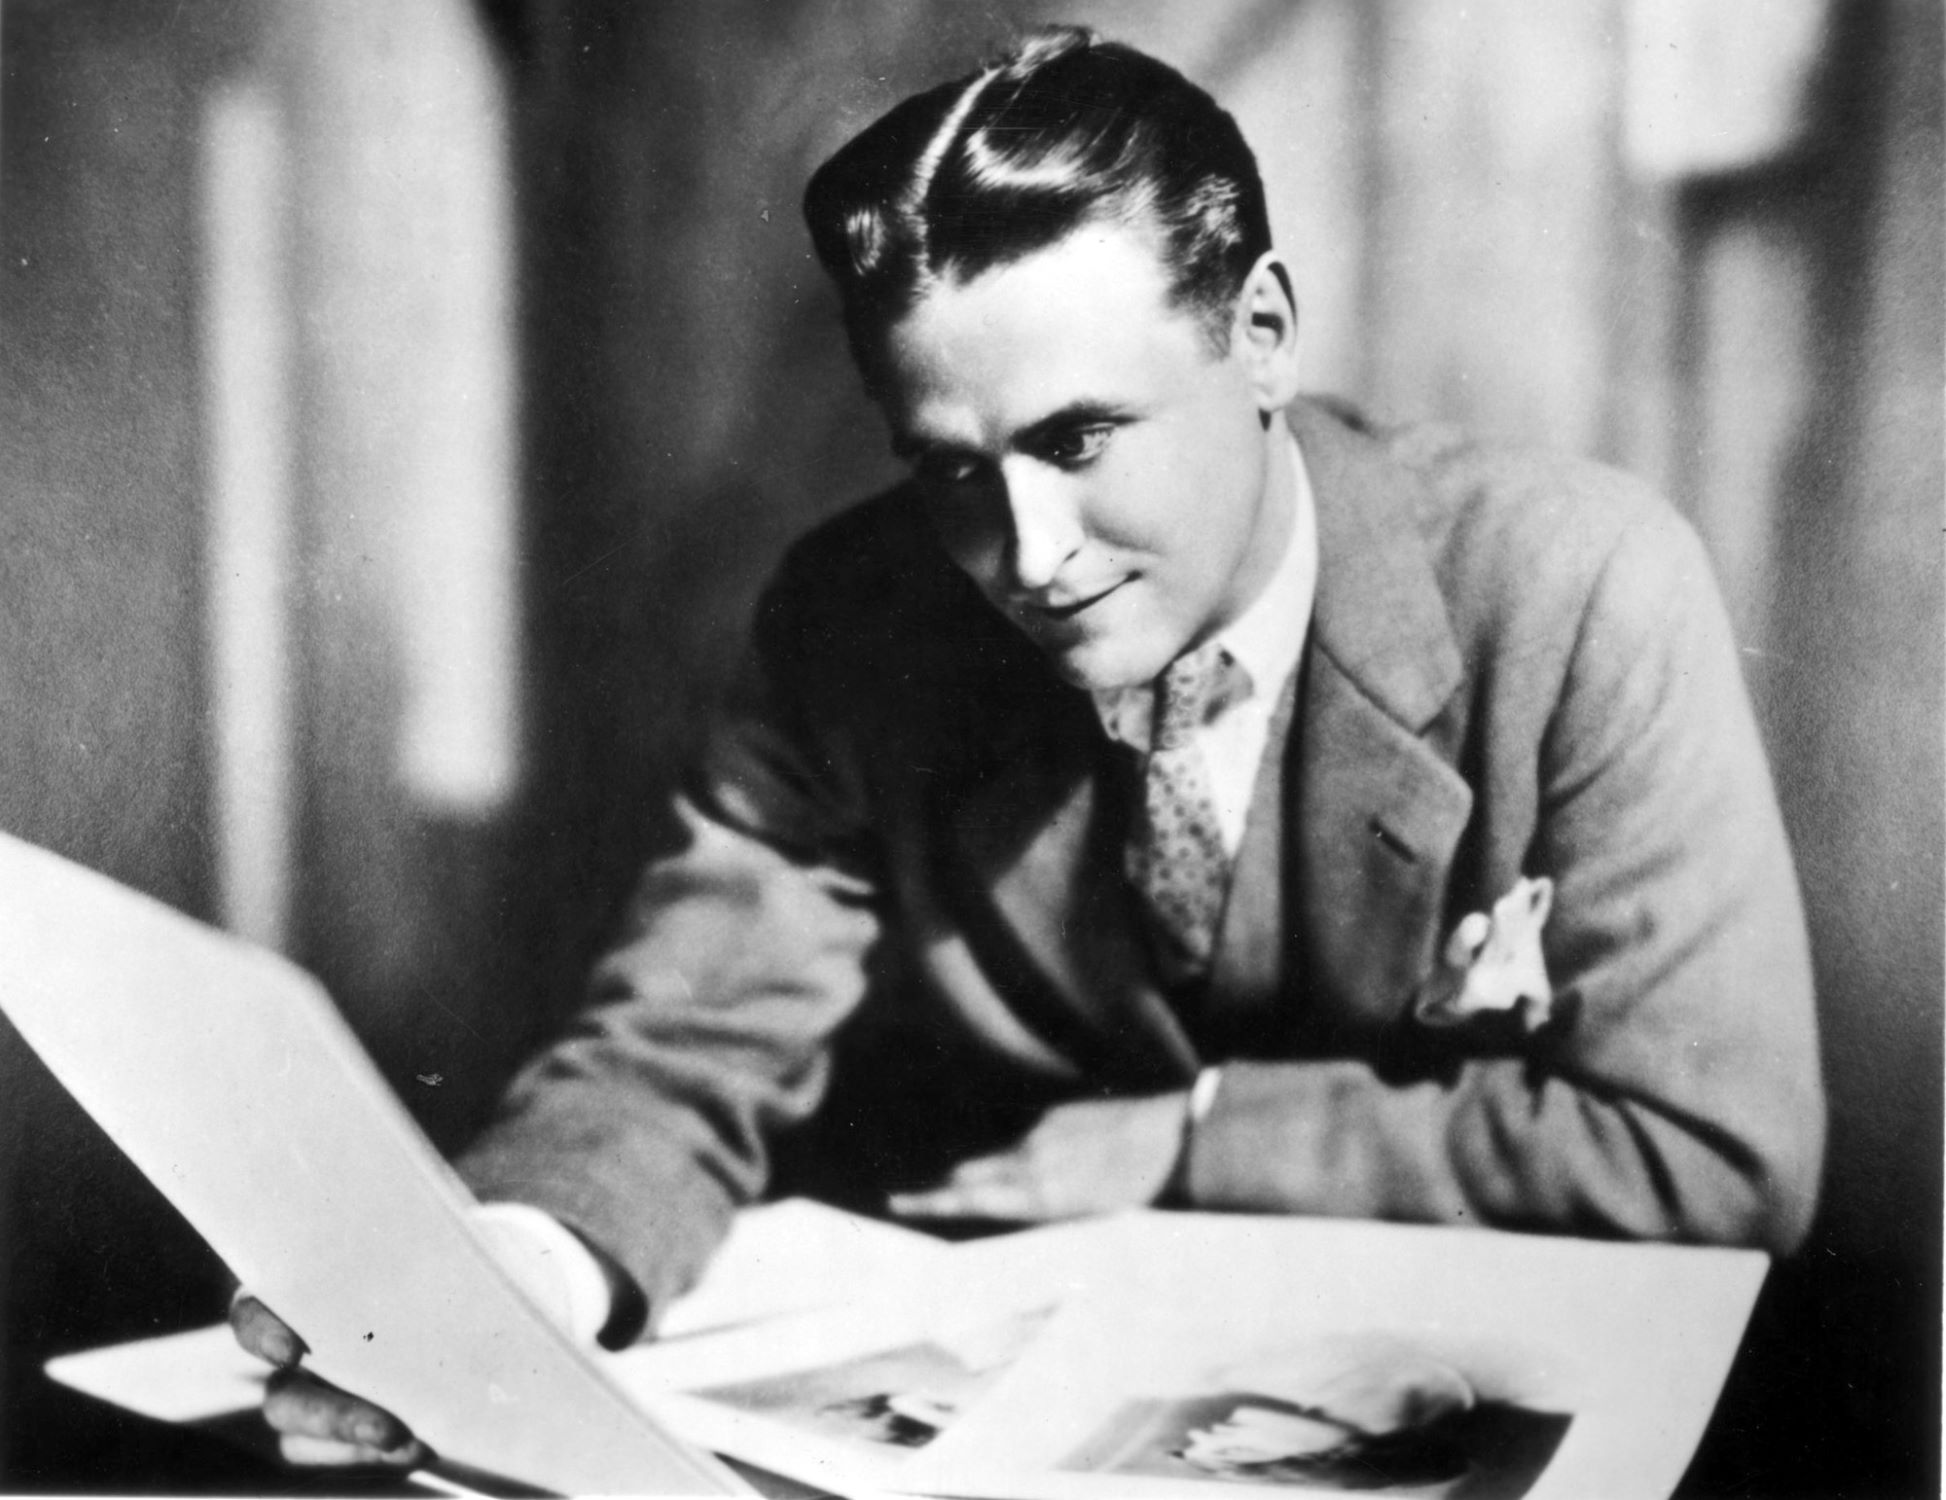 How Did The “Jazz Age ” A Moniker Fitzgerald Coined Provide A Climate Favorable To His Work?